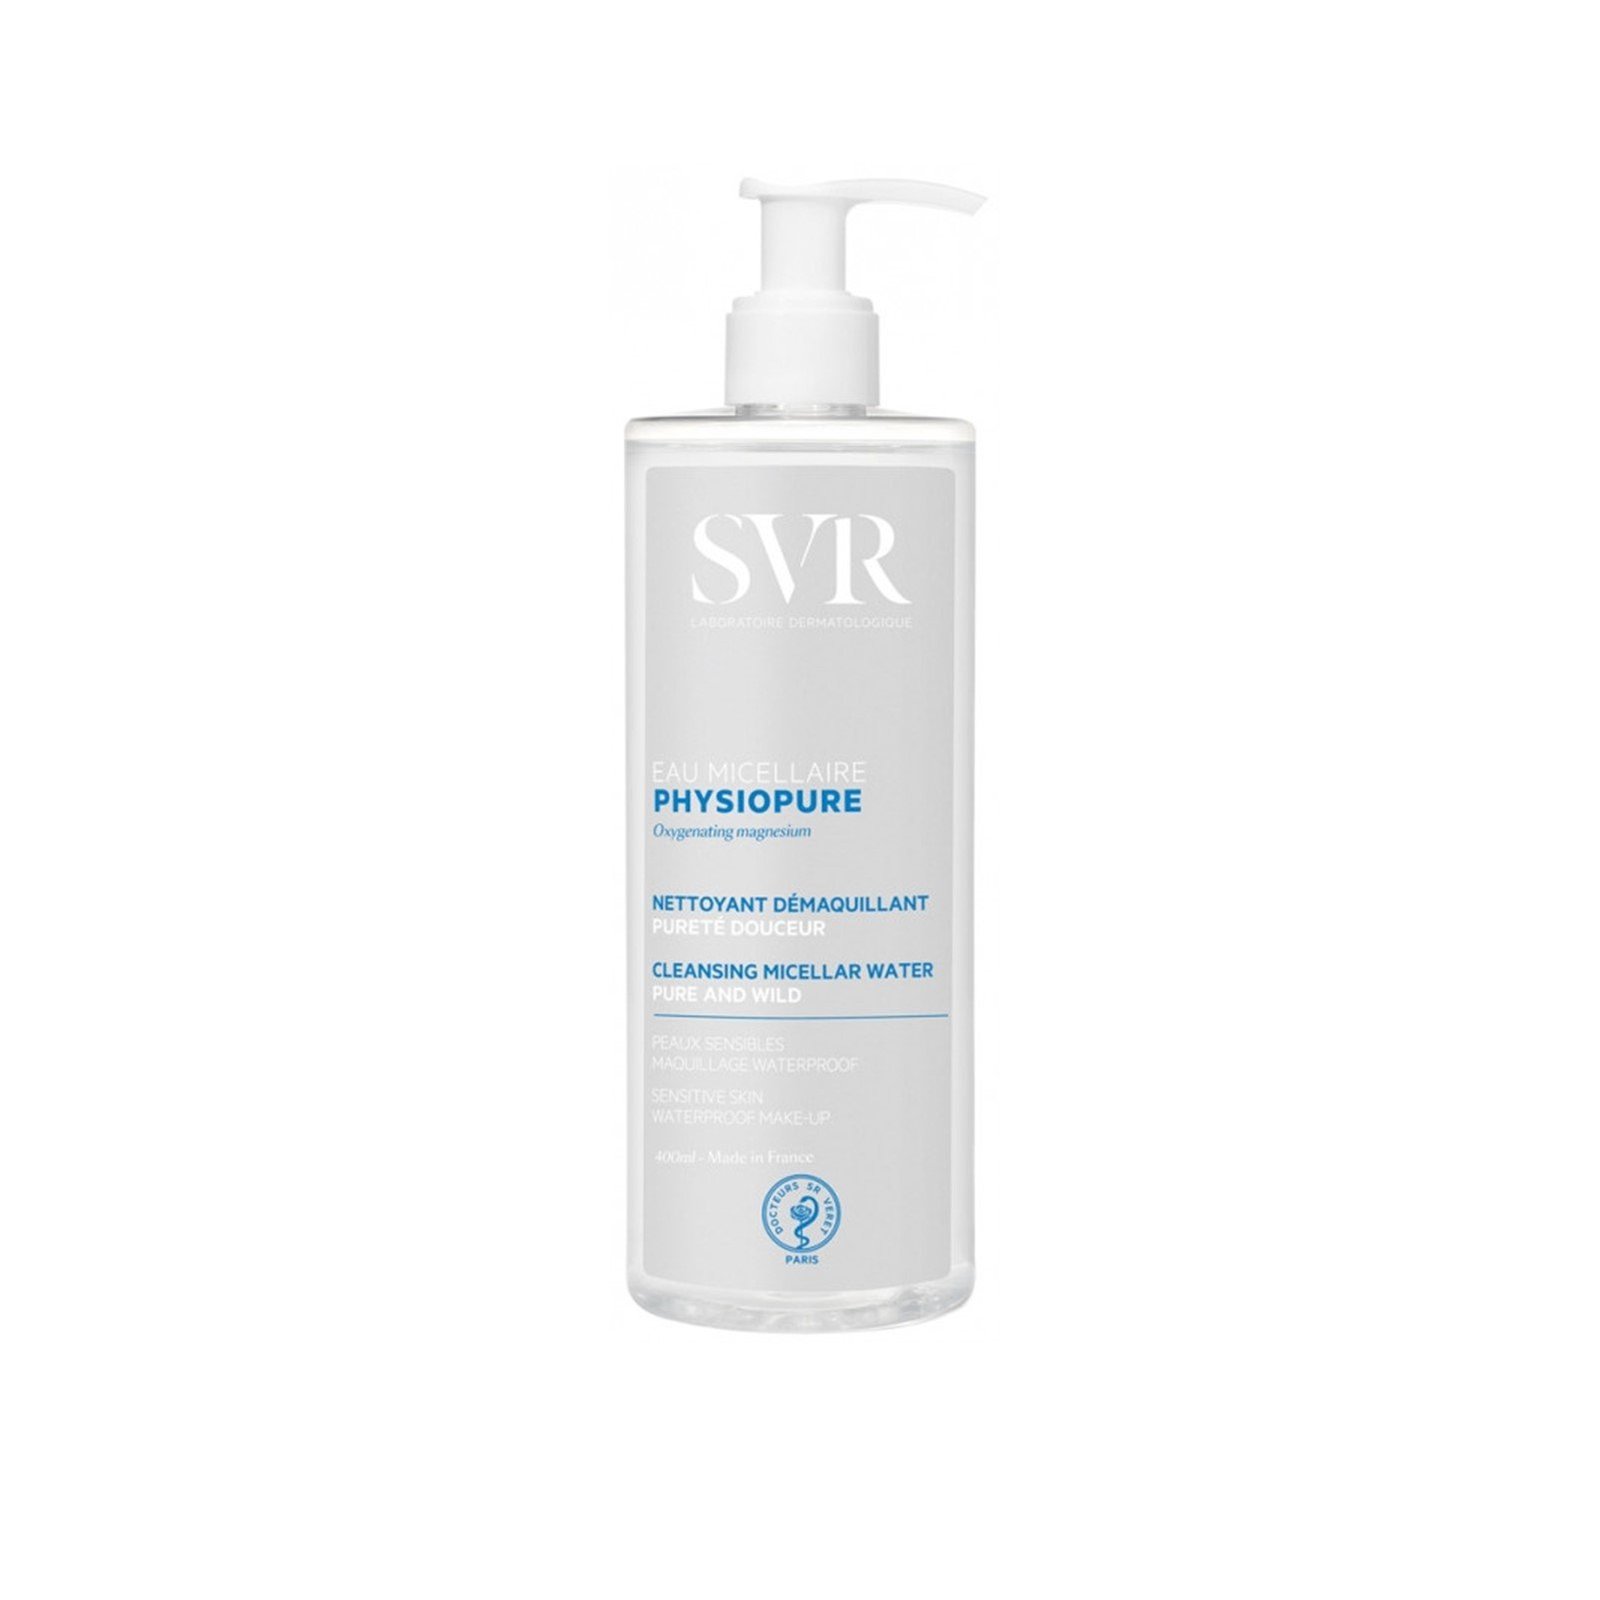 SVR Physiopure Cleansing Micellar Water 400ml (13.53fl oz)